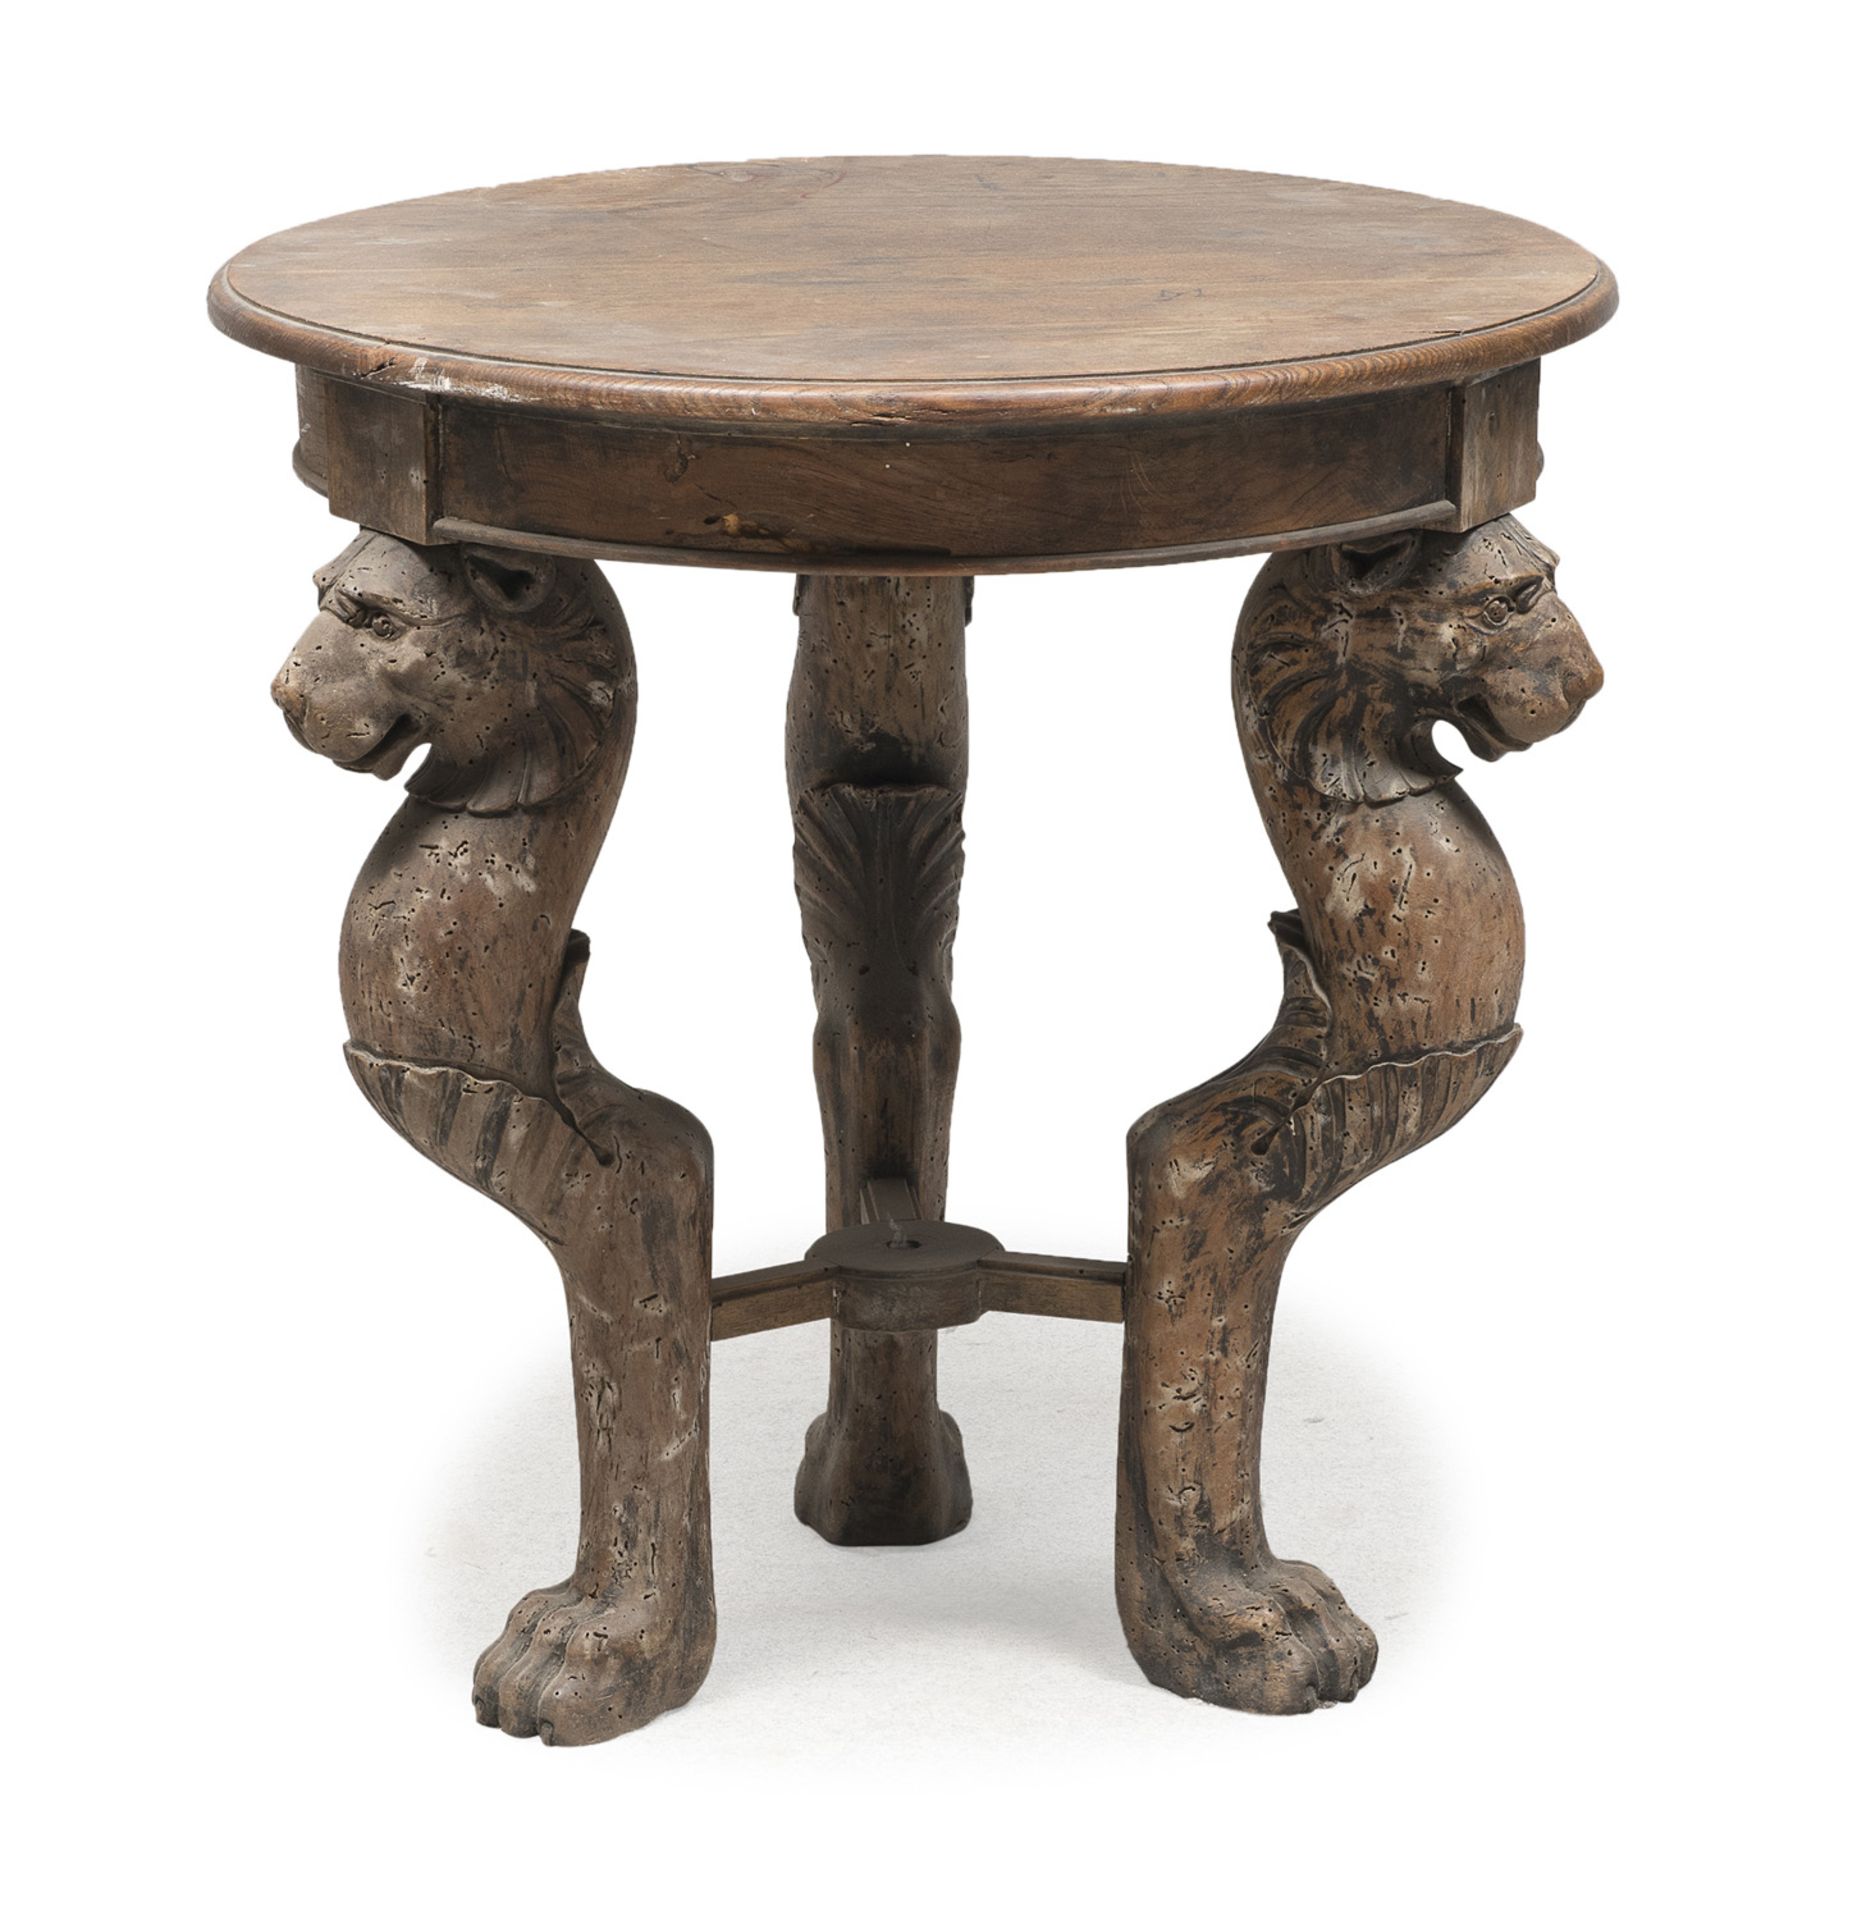 SMALL TABLE WITH 18th CENTURY ELEMENTS